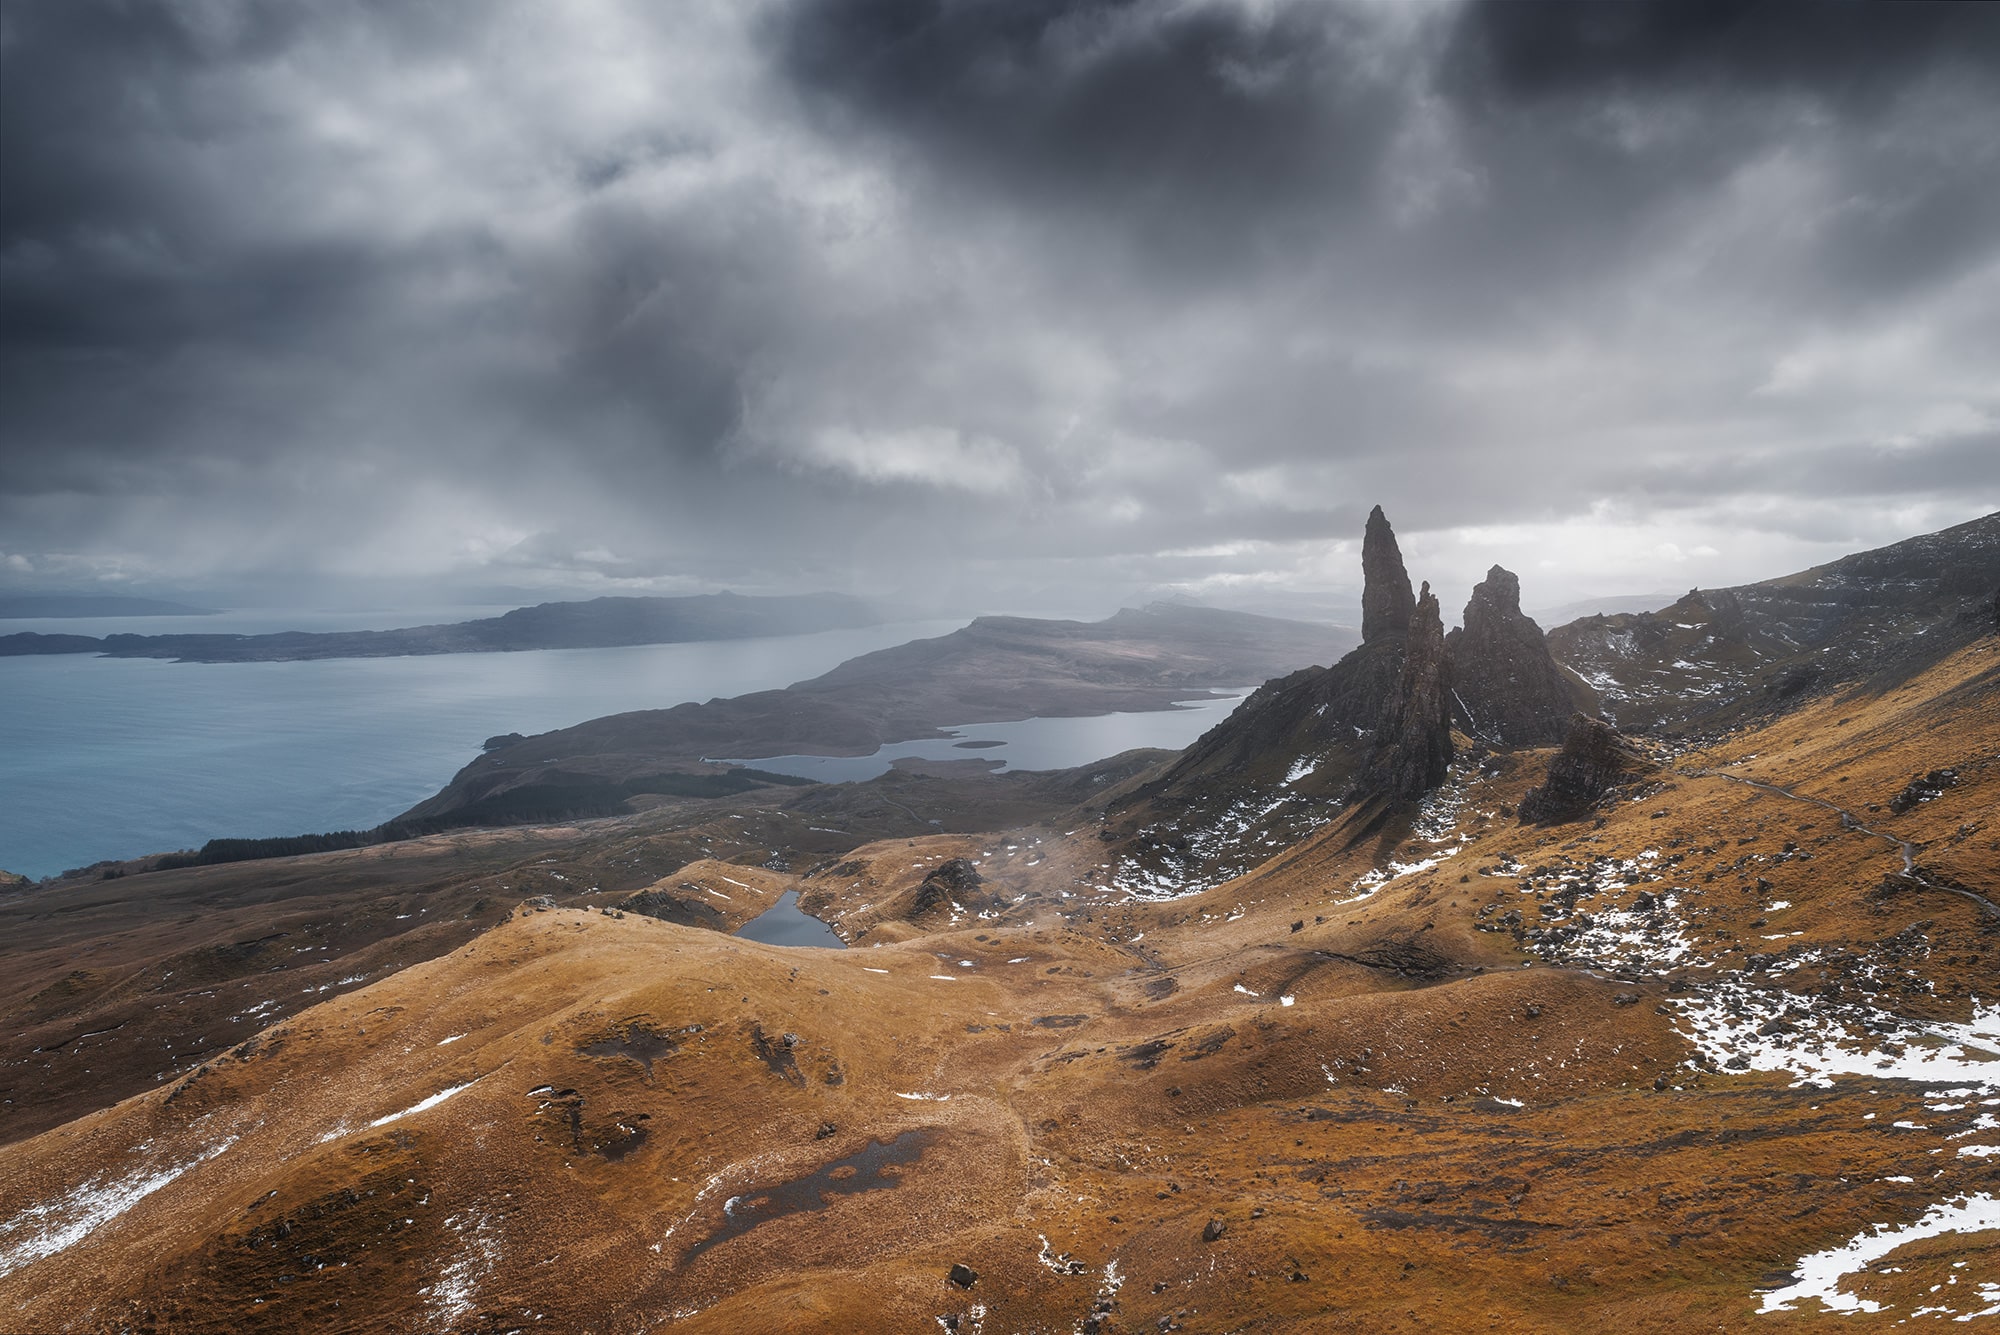 Experience the awe-inspiring grandeur of Skye Island, Scotland, with this epic landscape photography captured by Swiss photographer Jennifer Esseiva and her Nikon D810. Behold the iconic silhouette of the Old Man of Storr against a backdrop of dramatic skies, as Jennifer Esseiva masterfully captures the timeless beauty of this rugged landscape. The towering rock formations and swirling clouds evoke a sense of ancient mystique and untamed wilderness, inviting viewers to embark on a visual journey through the heart of the Scottish Highlands. Join Esseiva on this extraordinary adventure where every frame tells a story of nature's raw power and breathtaking beauty.